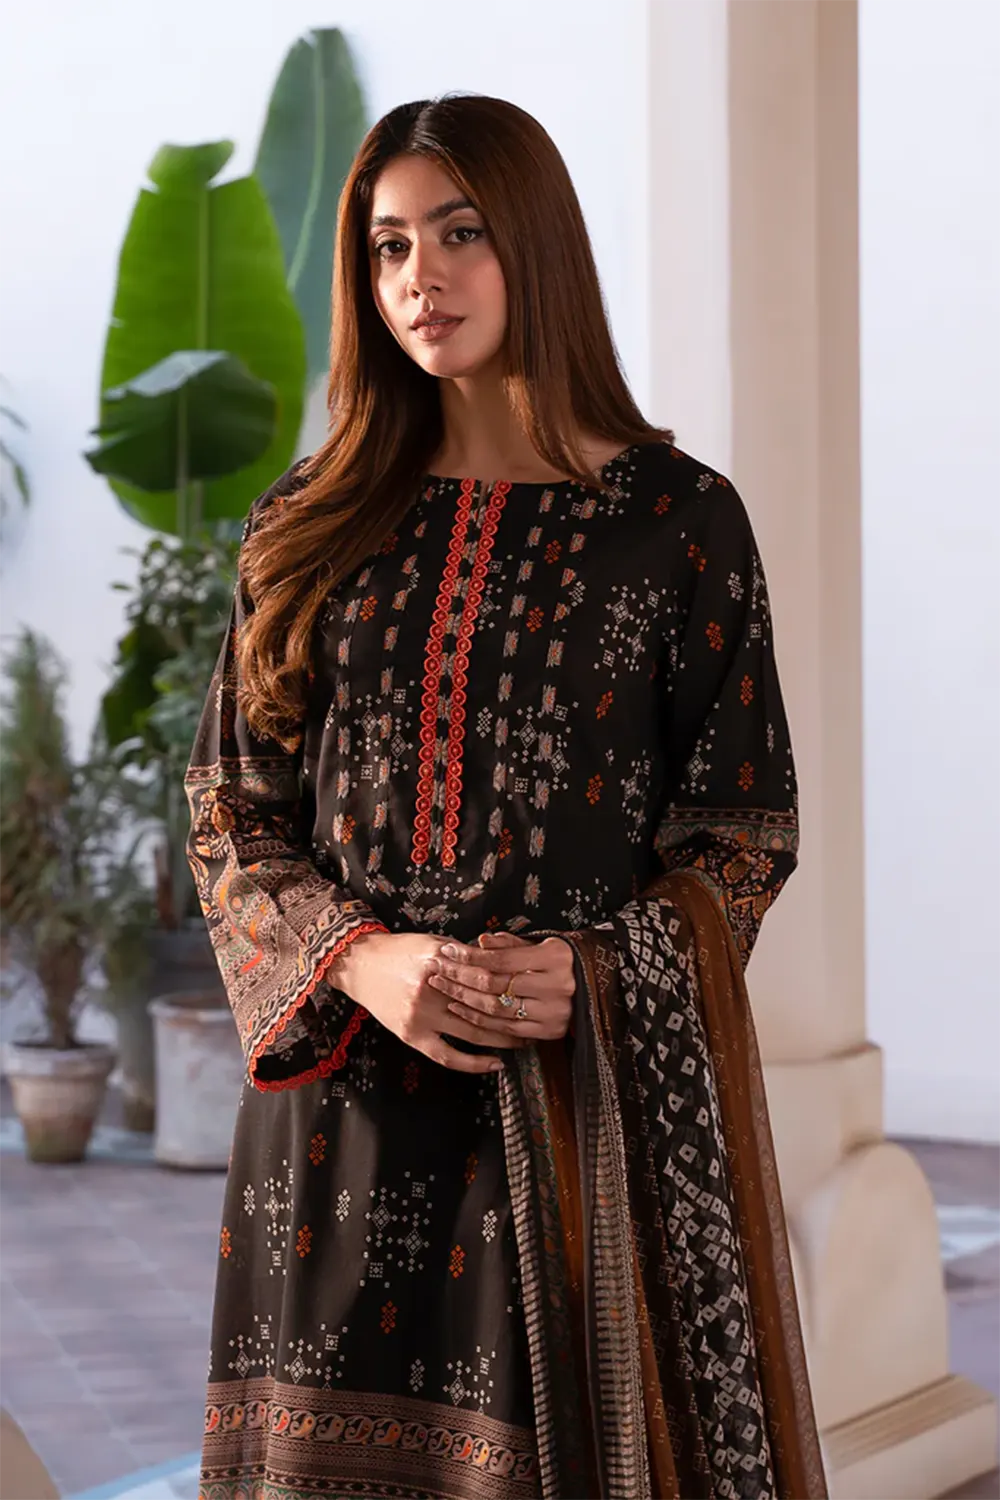 3-PC Unstitched Printed Lawn Shirt with Chiffon Dupatta and Trouser CP4-24 by Chrizma